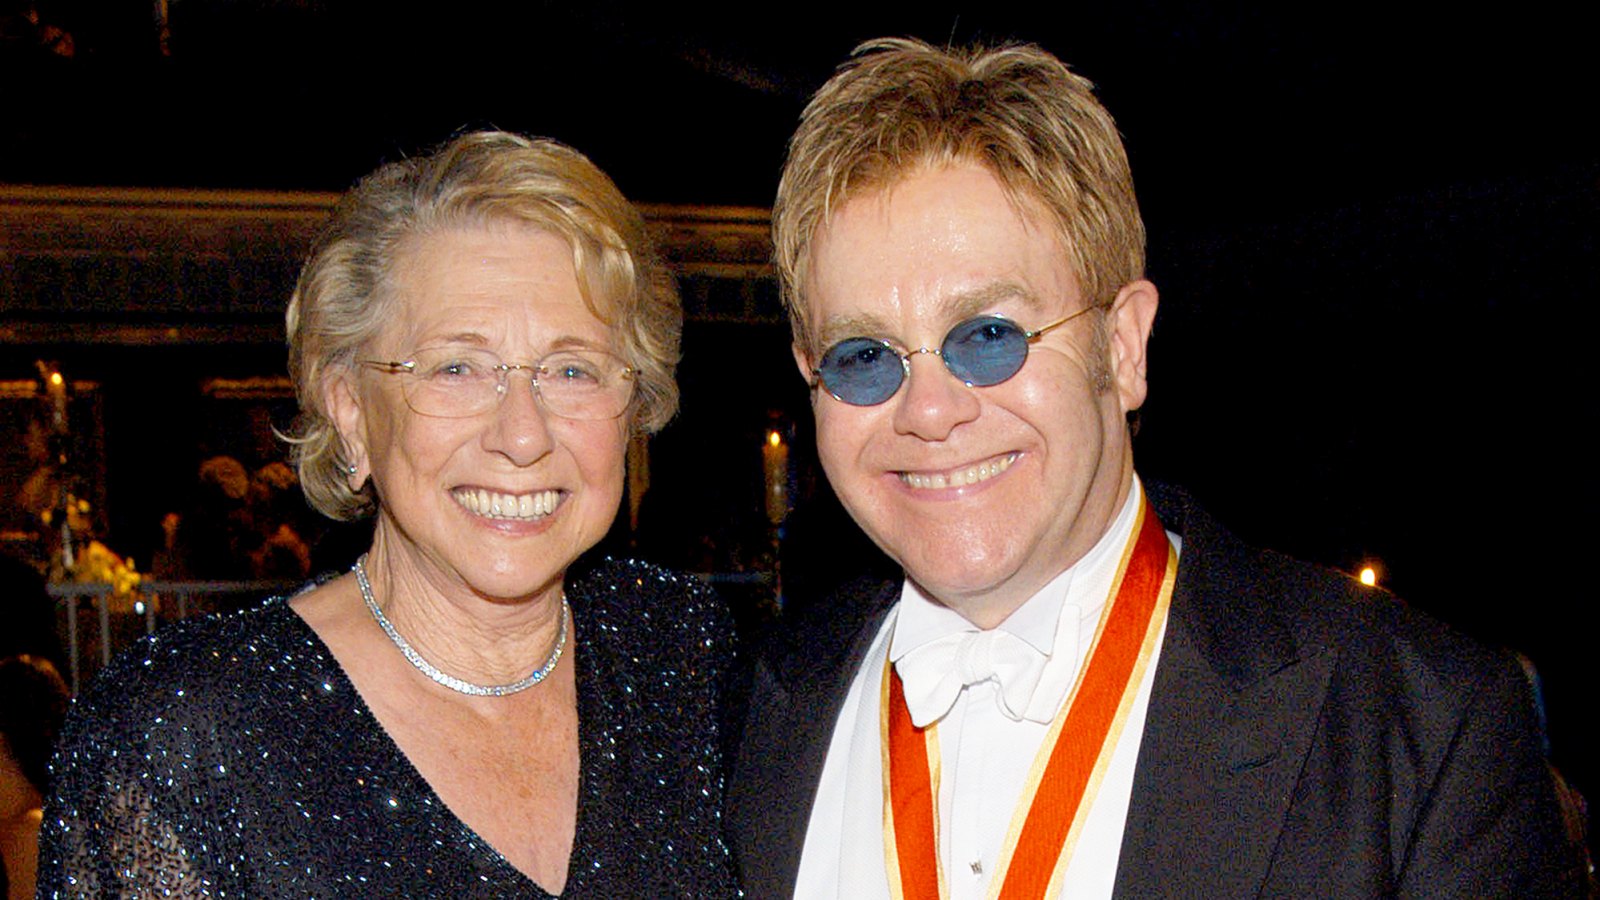 Sir Elton John and his mother Sheila Eileen Farebrother during The Fifth Annual White Tie & Tiara Ball to Benefit the Elton John Aids Foundation in Windsor, England, United Kingdom.